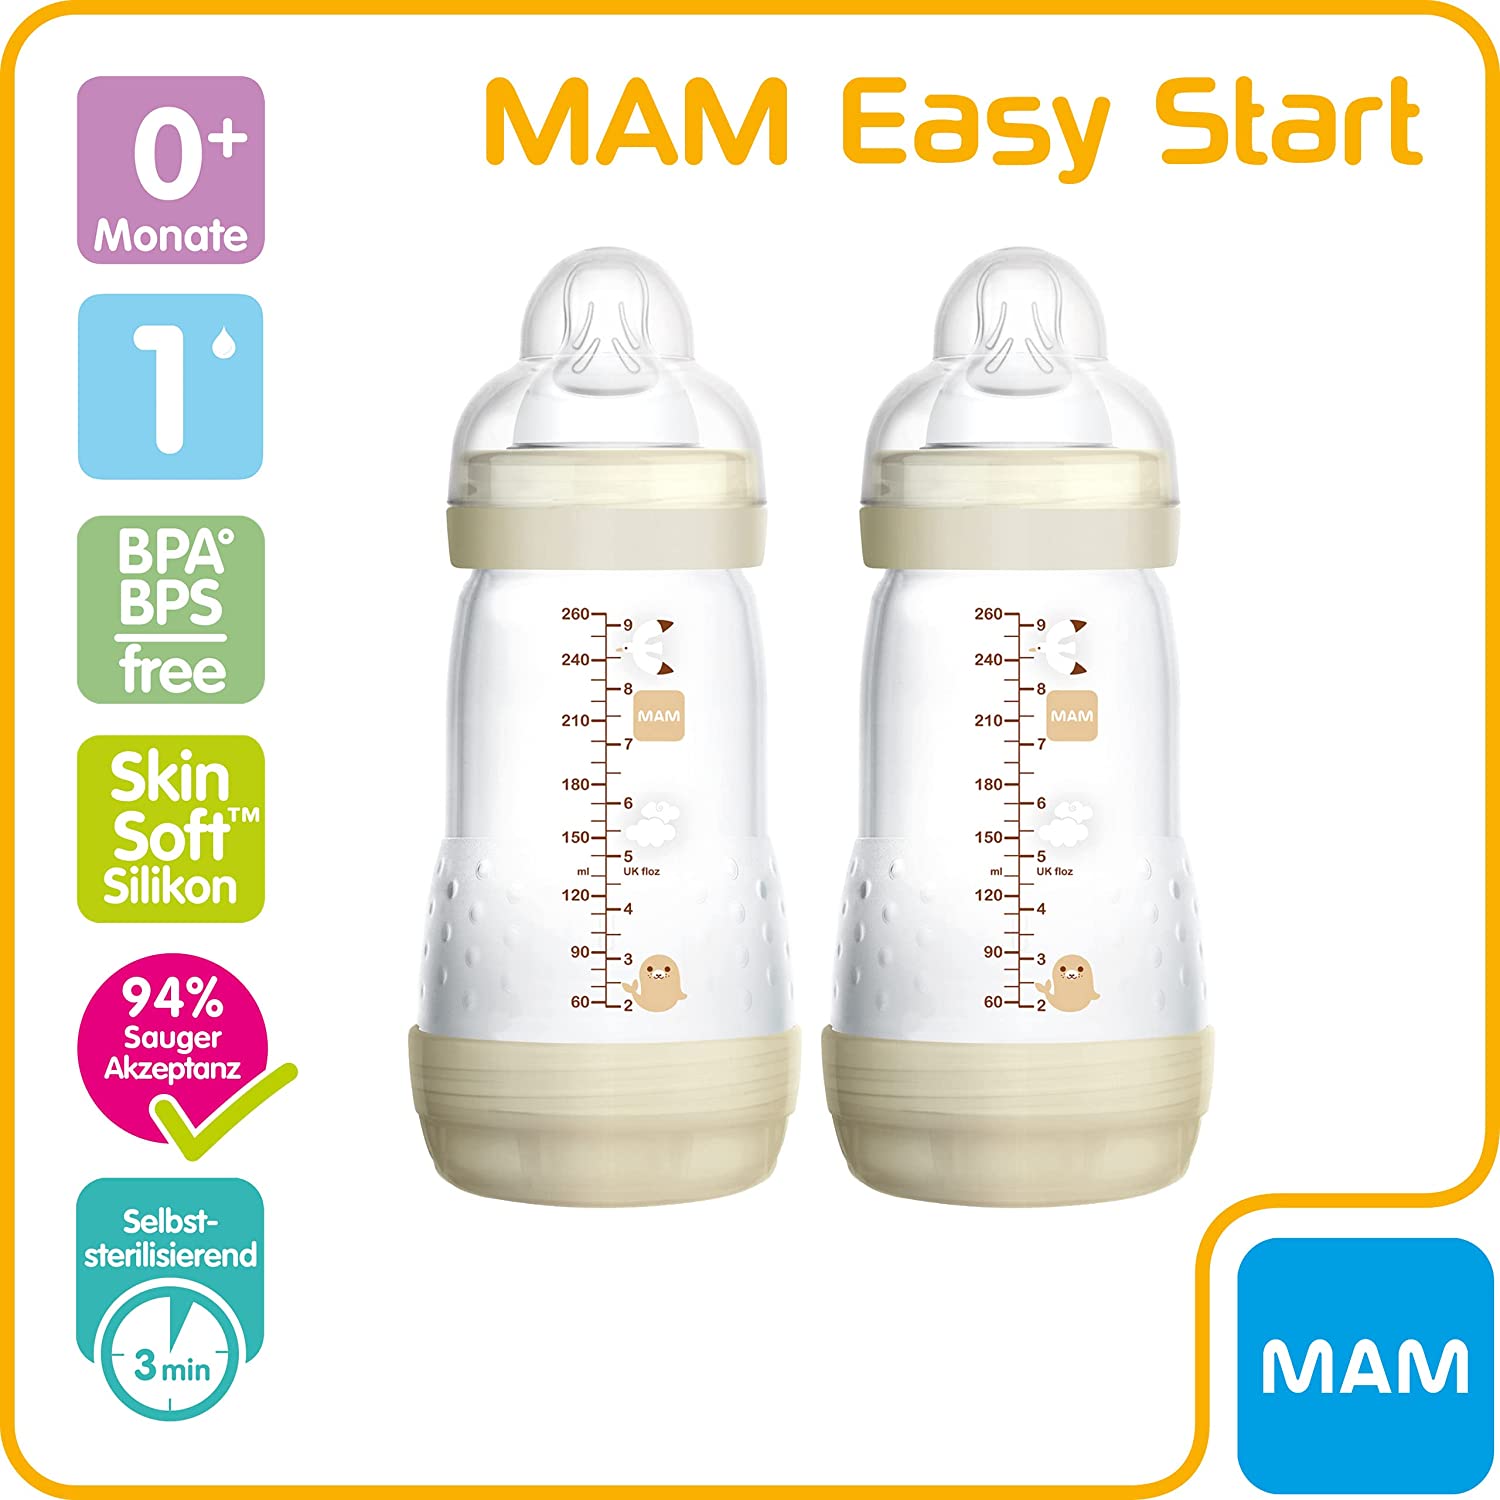 MAM Easy Start anti-colic baby bottle (260 ml), milk bottle with innovative base valve to prevent colic, baby’s drinking bottle with size 1 teat, from birth, seal, set of 2